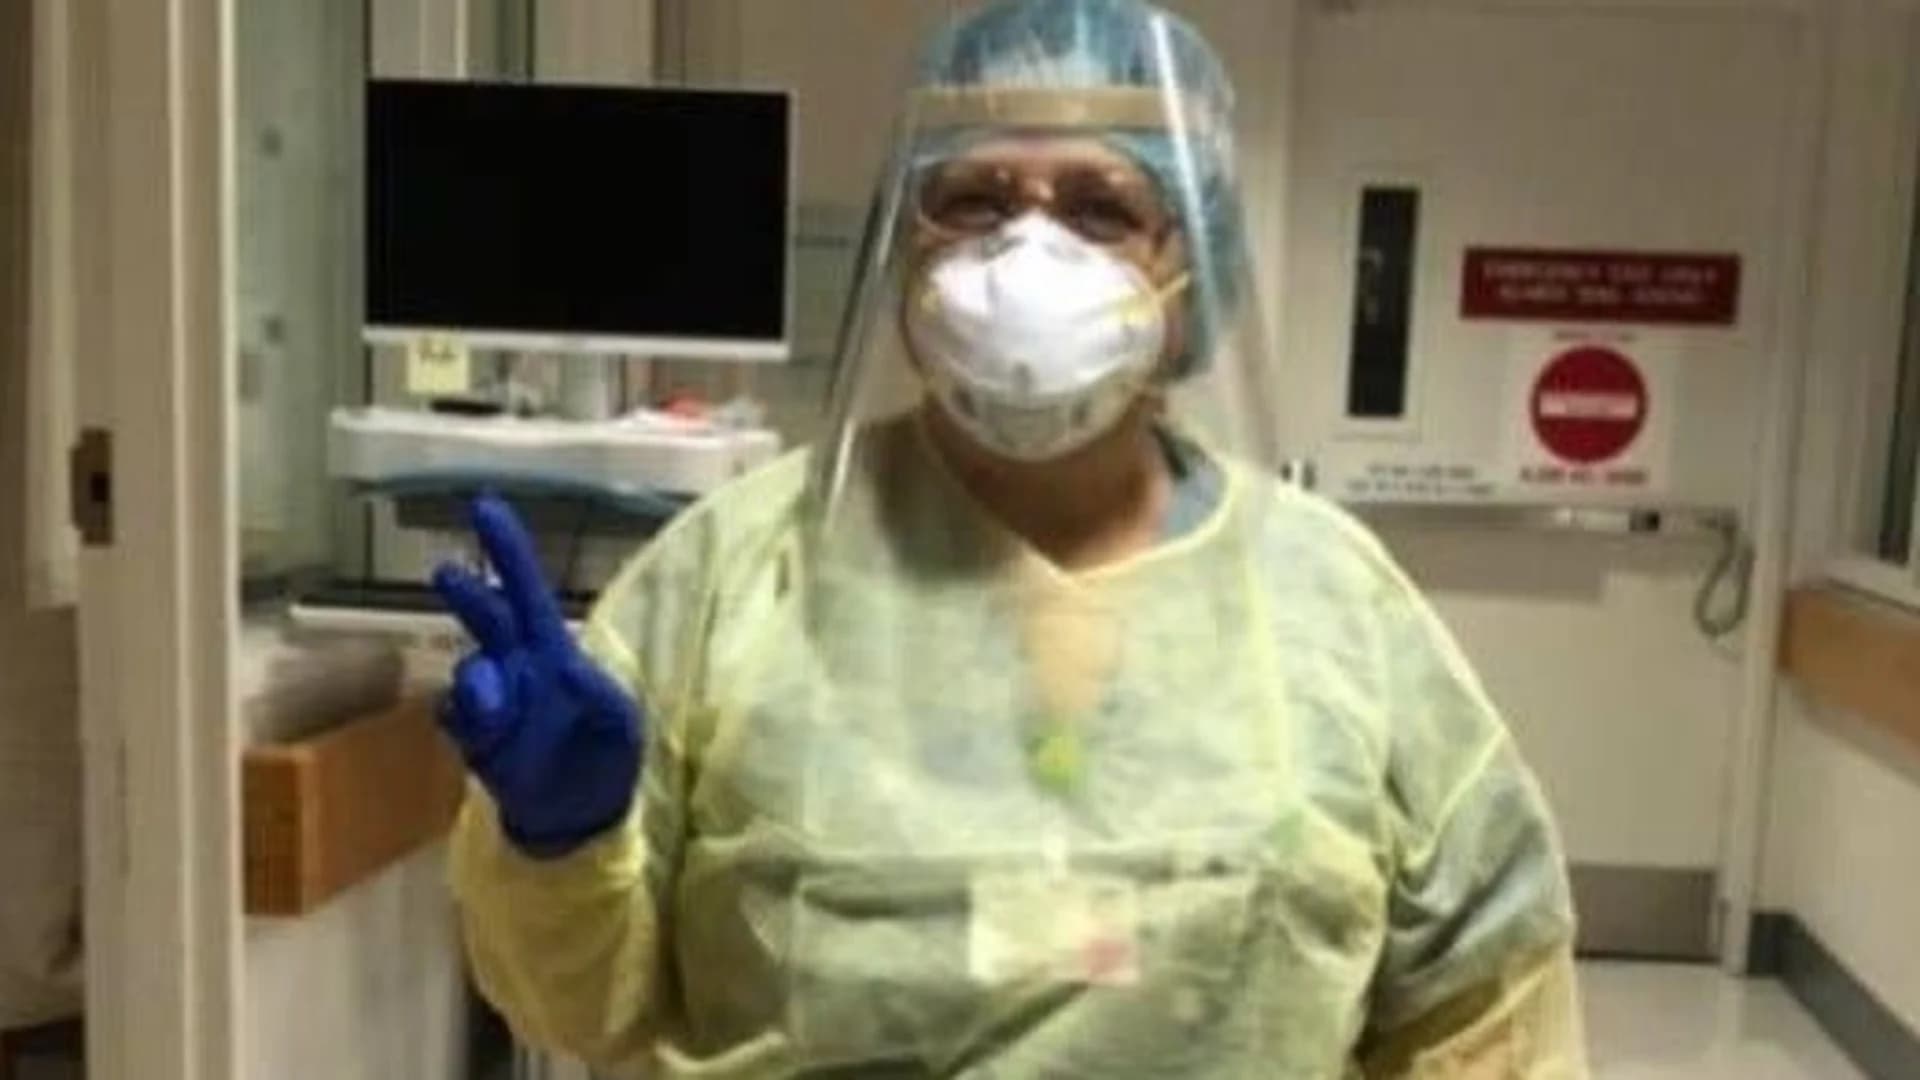 Peruvian immigrant cleans “red zone” at White Plains Hospital